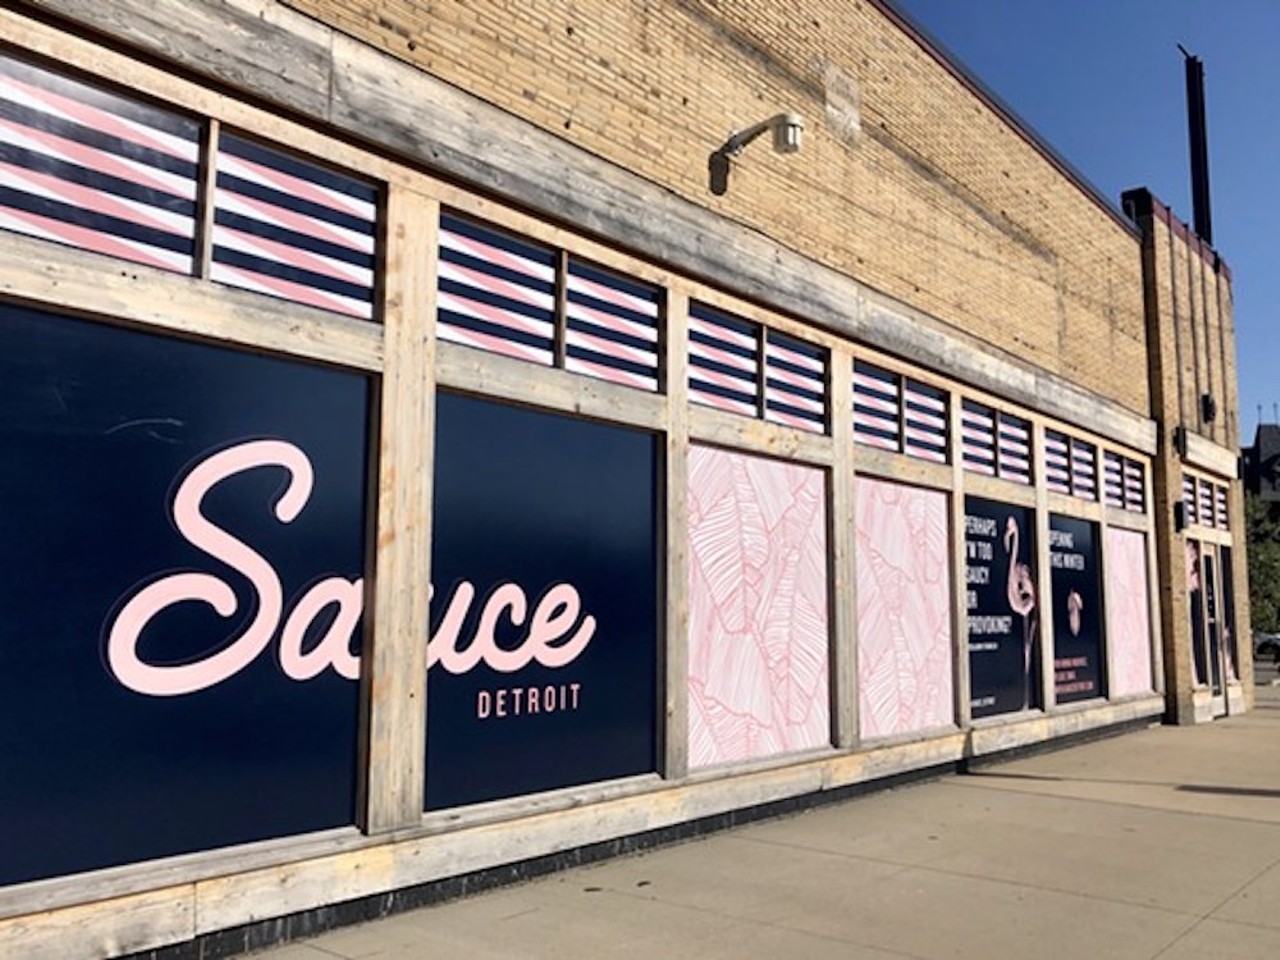 Sauce
4120 2nd Ave., Detroit; saucedetroit.com
This Heirloom Hospitality (Townhouse, Prime + Proper) Italian-inspired spot was supposed to open in the spring of 2021, but was put on hold during the coronavirus pandemic. Sauce will open in the former Will Leather Goods along Cass Corridor with former Otus Supply chef Myles McVay at the helm. Featuring Neapolitan pizzas and other dishes inspired by Italy and Southern California, Sauce will also include a coffee bar that will serve lattes and gelato. It&#146;s expected to seat 300 people, including patio seating. Though they&#146;re slinging pies out of Townhouse curbside, Sauce is expected to formally open in the spring. 
Photo by Steve Neavling